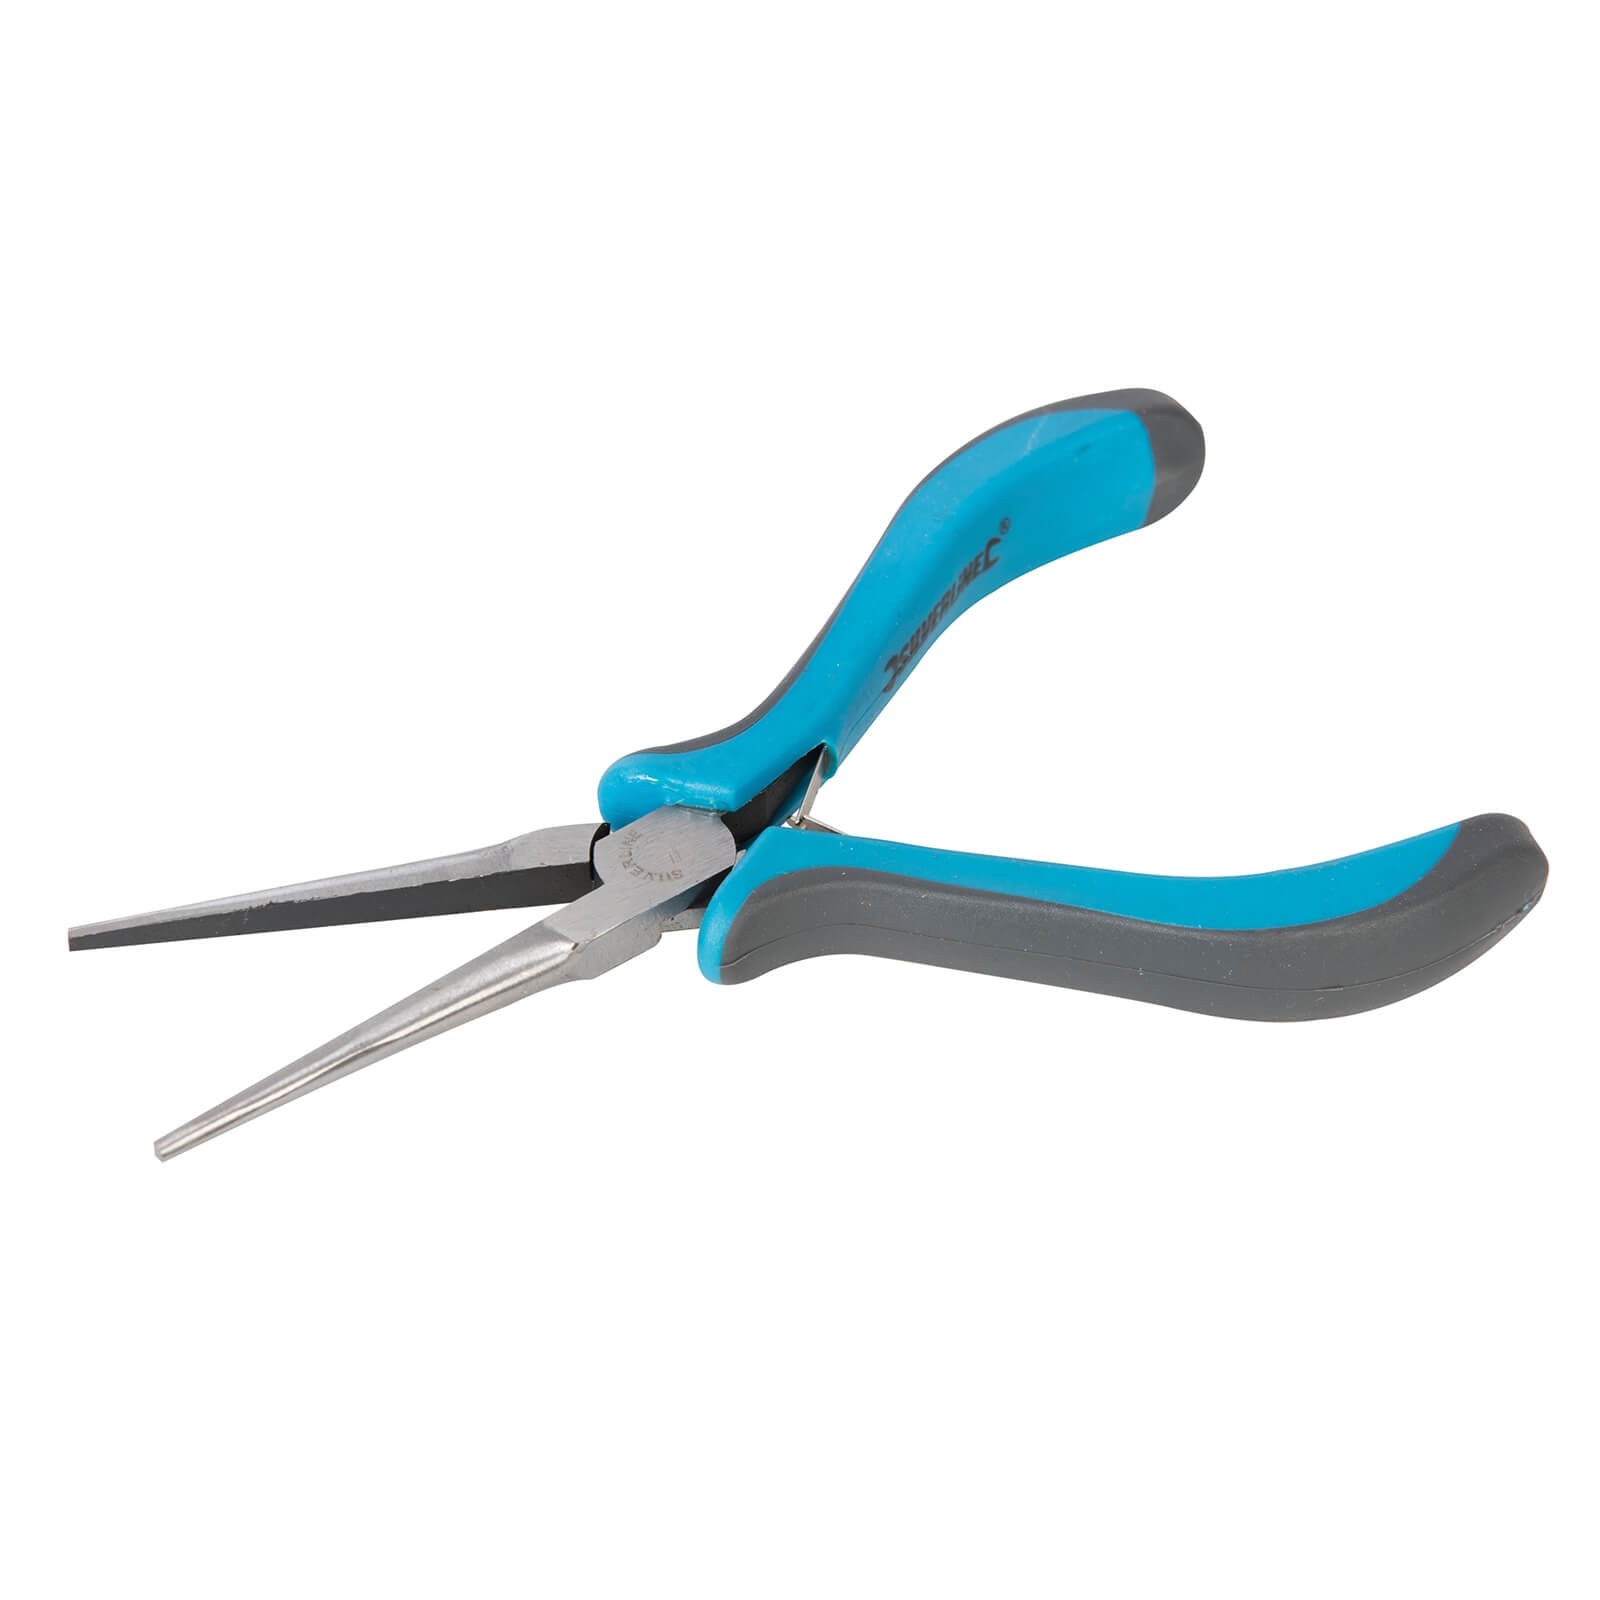 Photo of Silverline Needle Nose Mini Pliers - 155mm